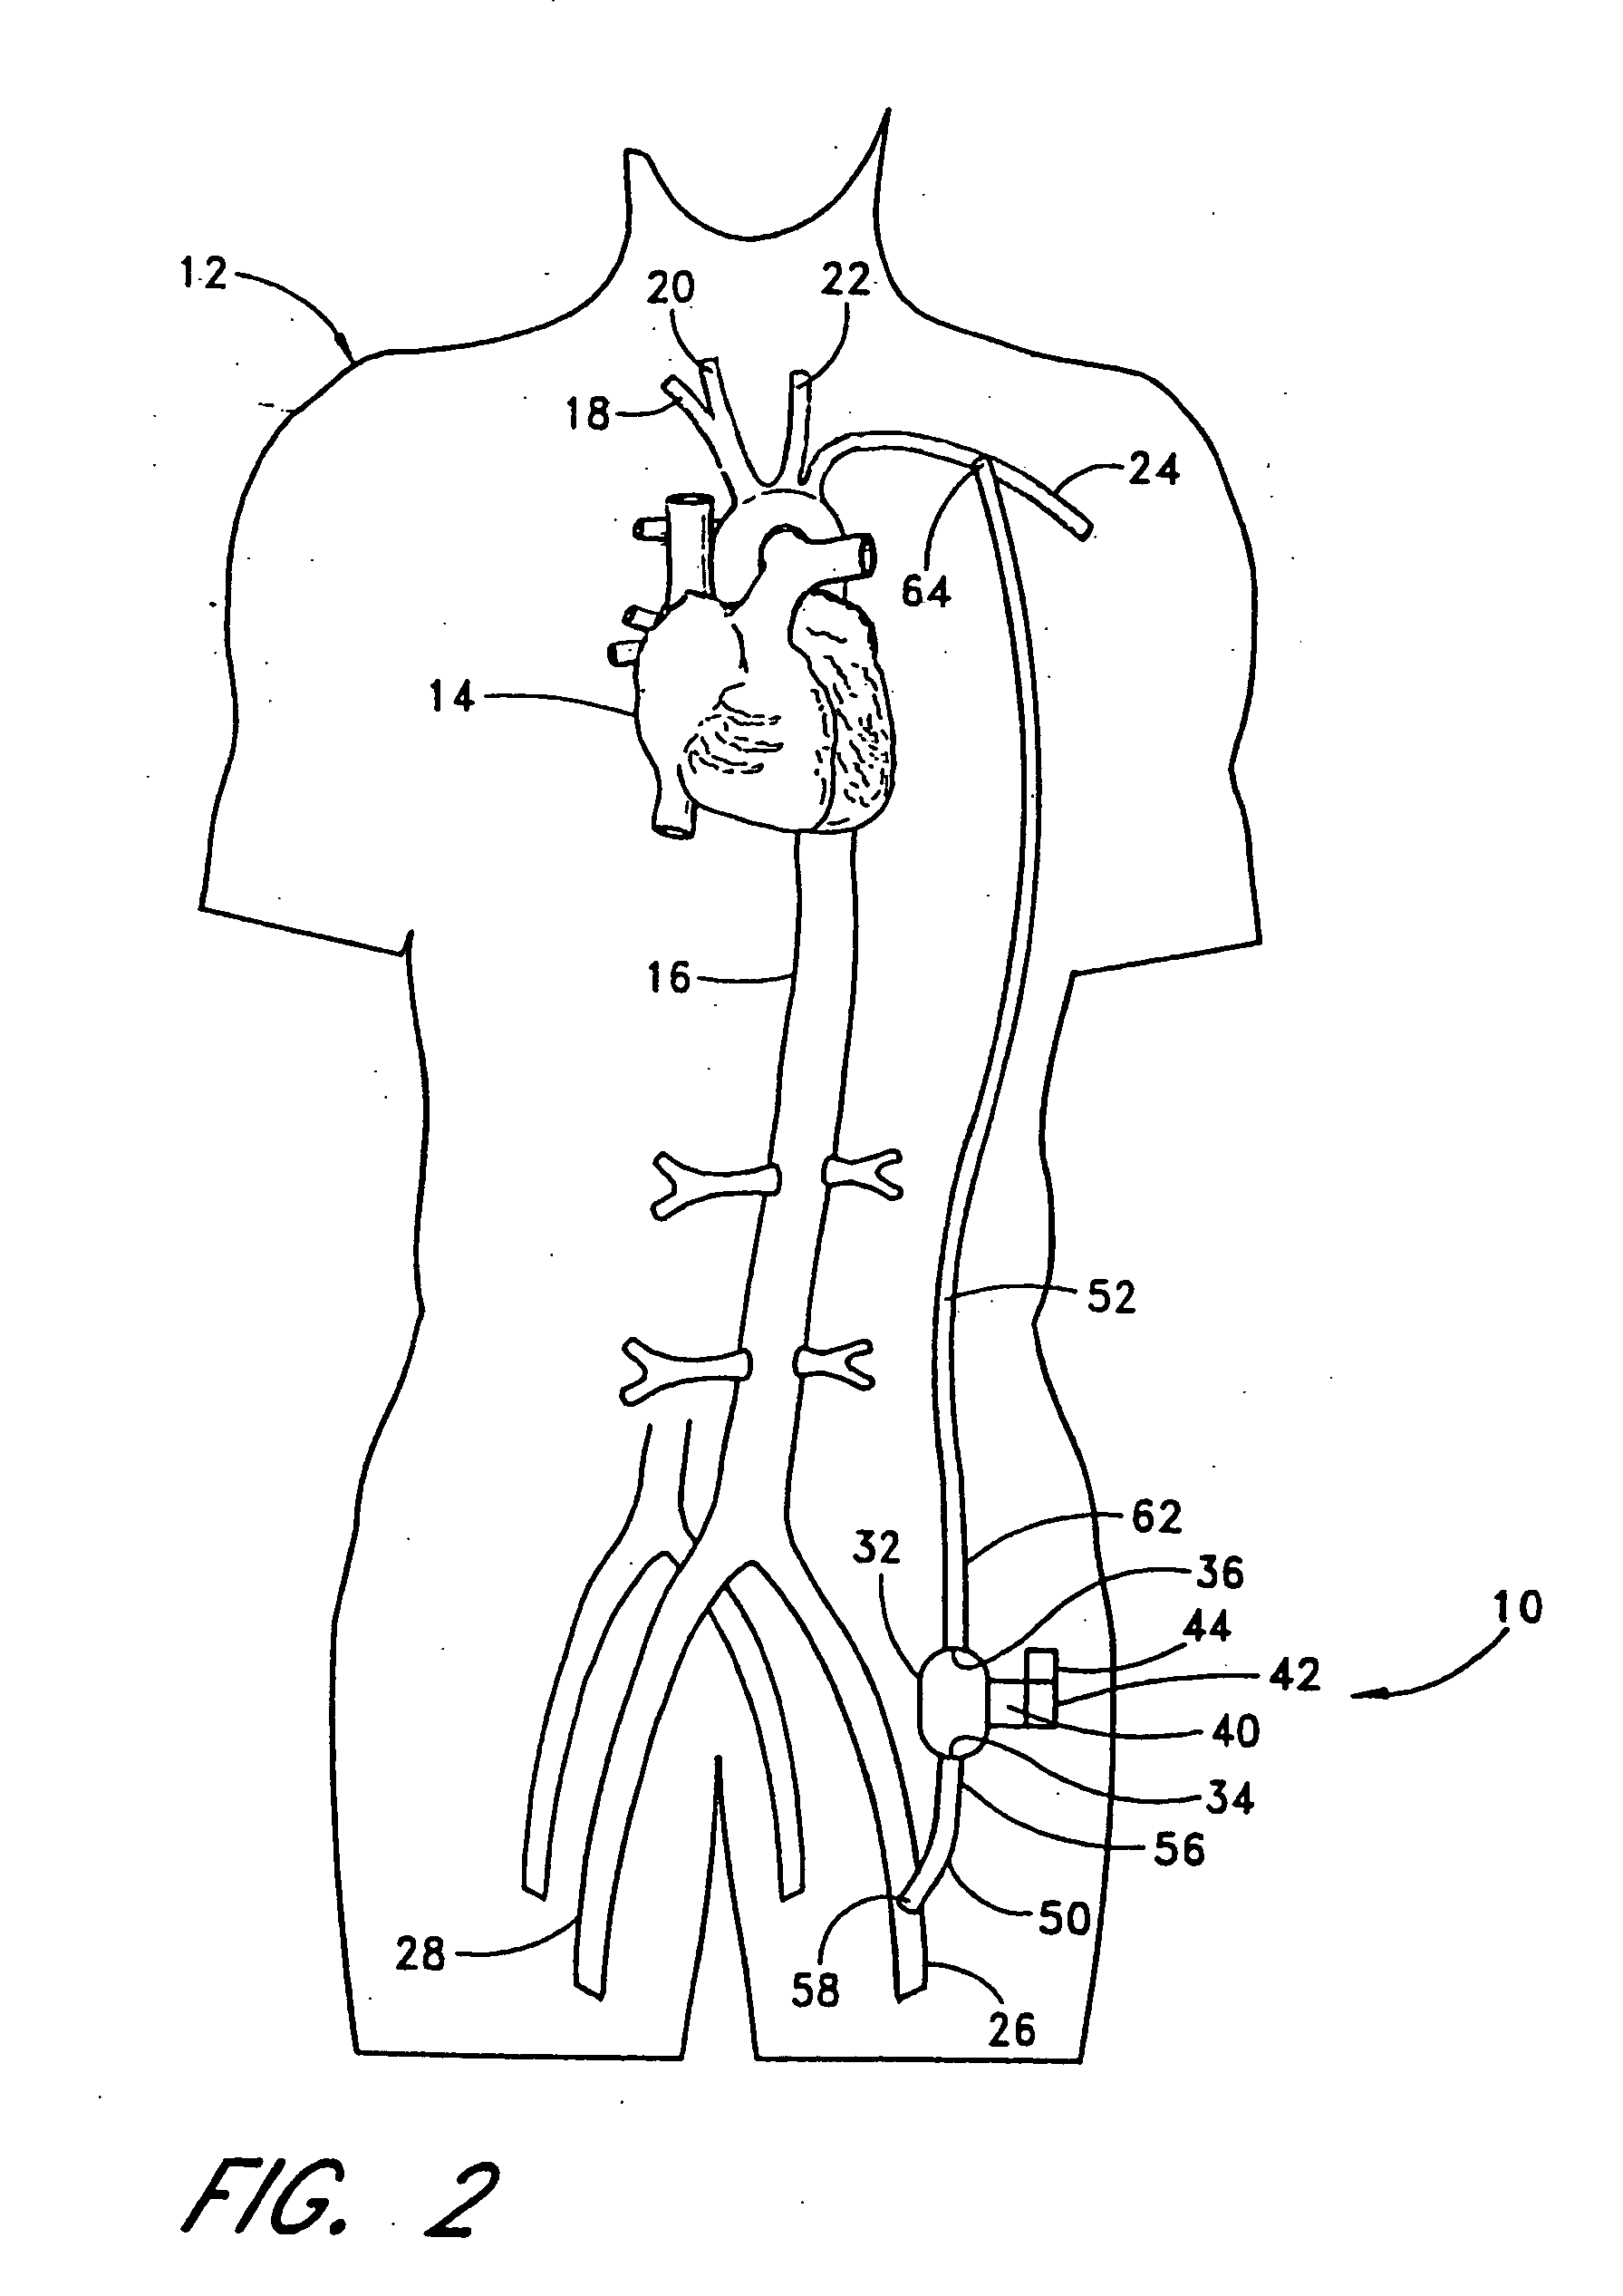 Implantable heart assist system and method of applying same